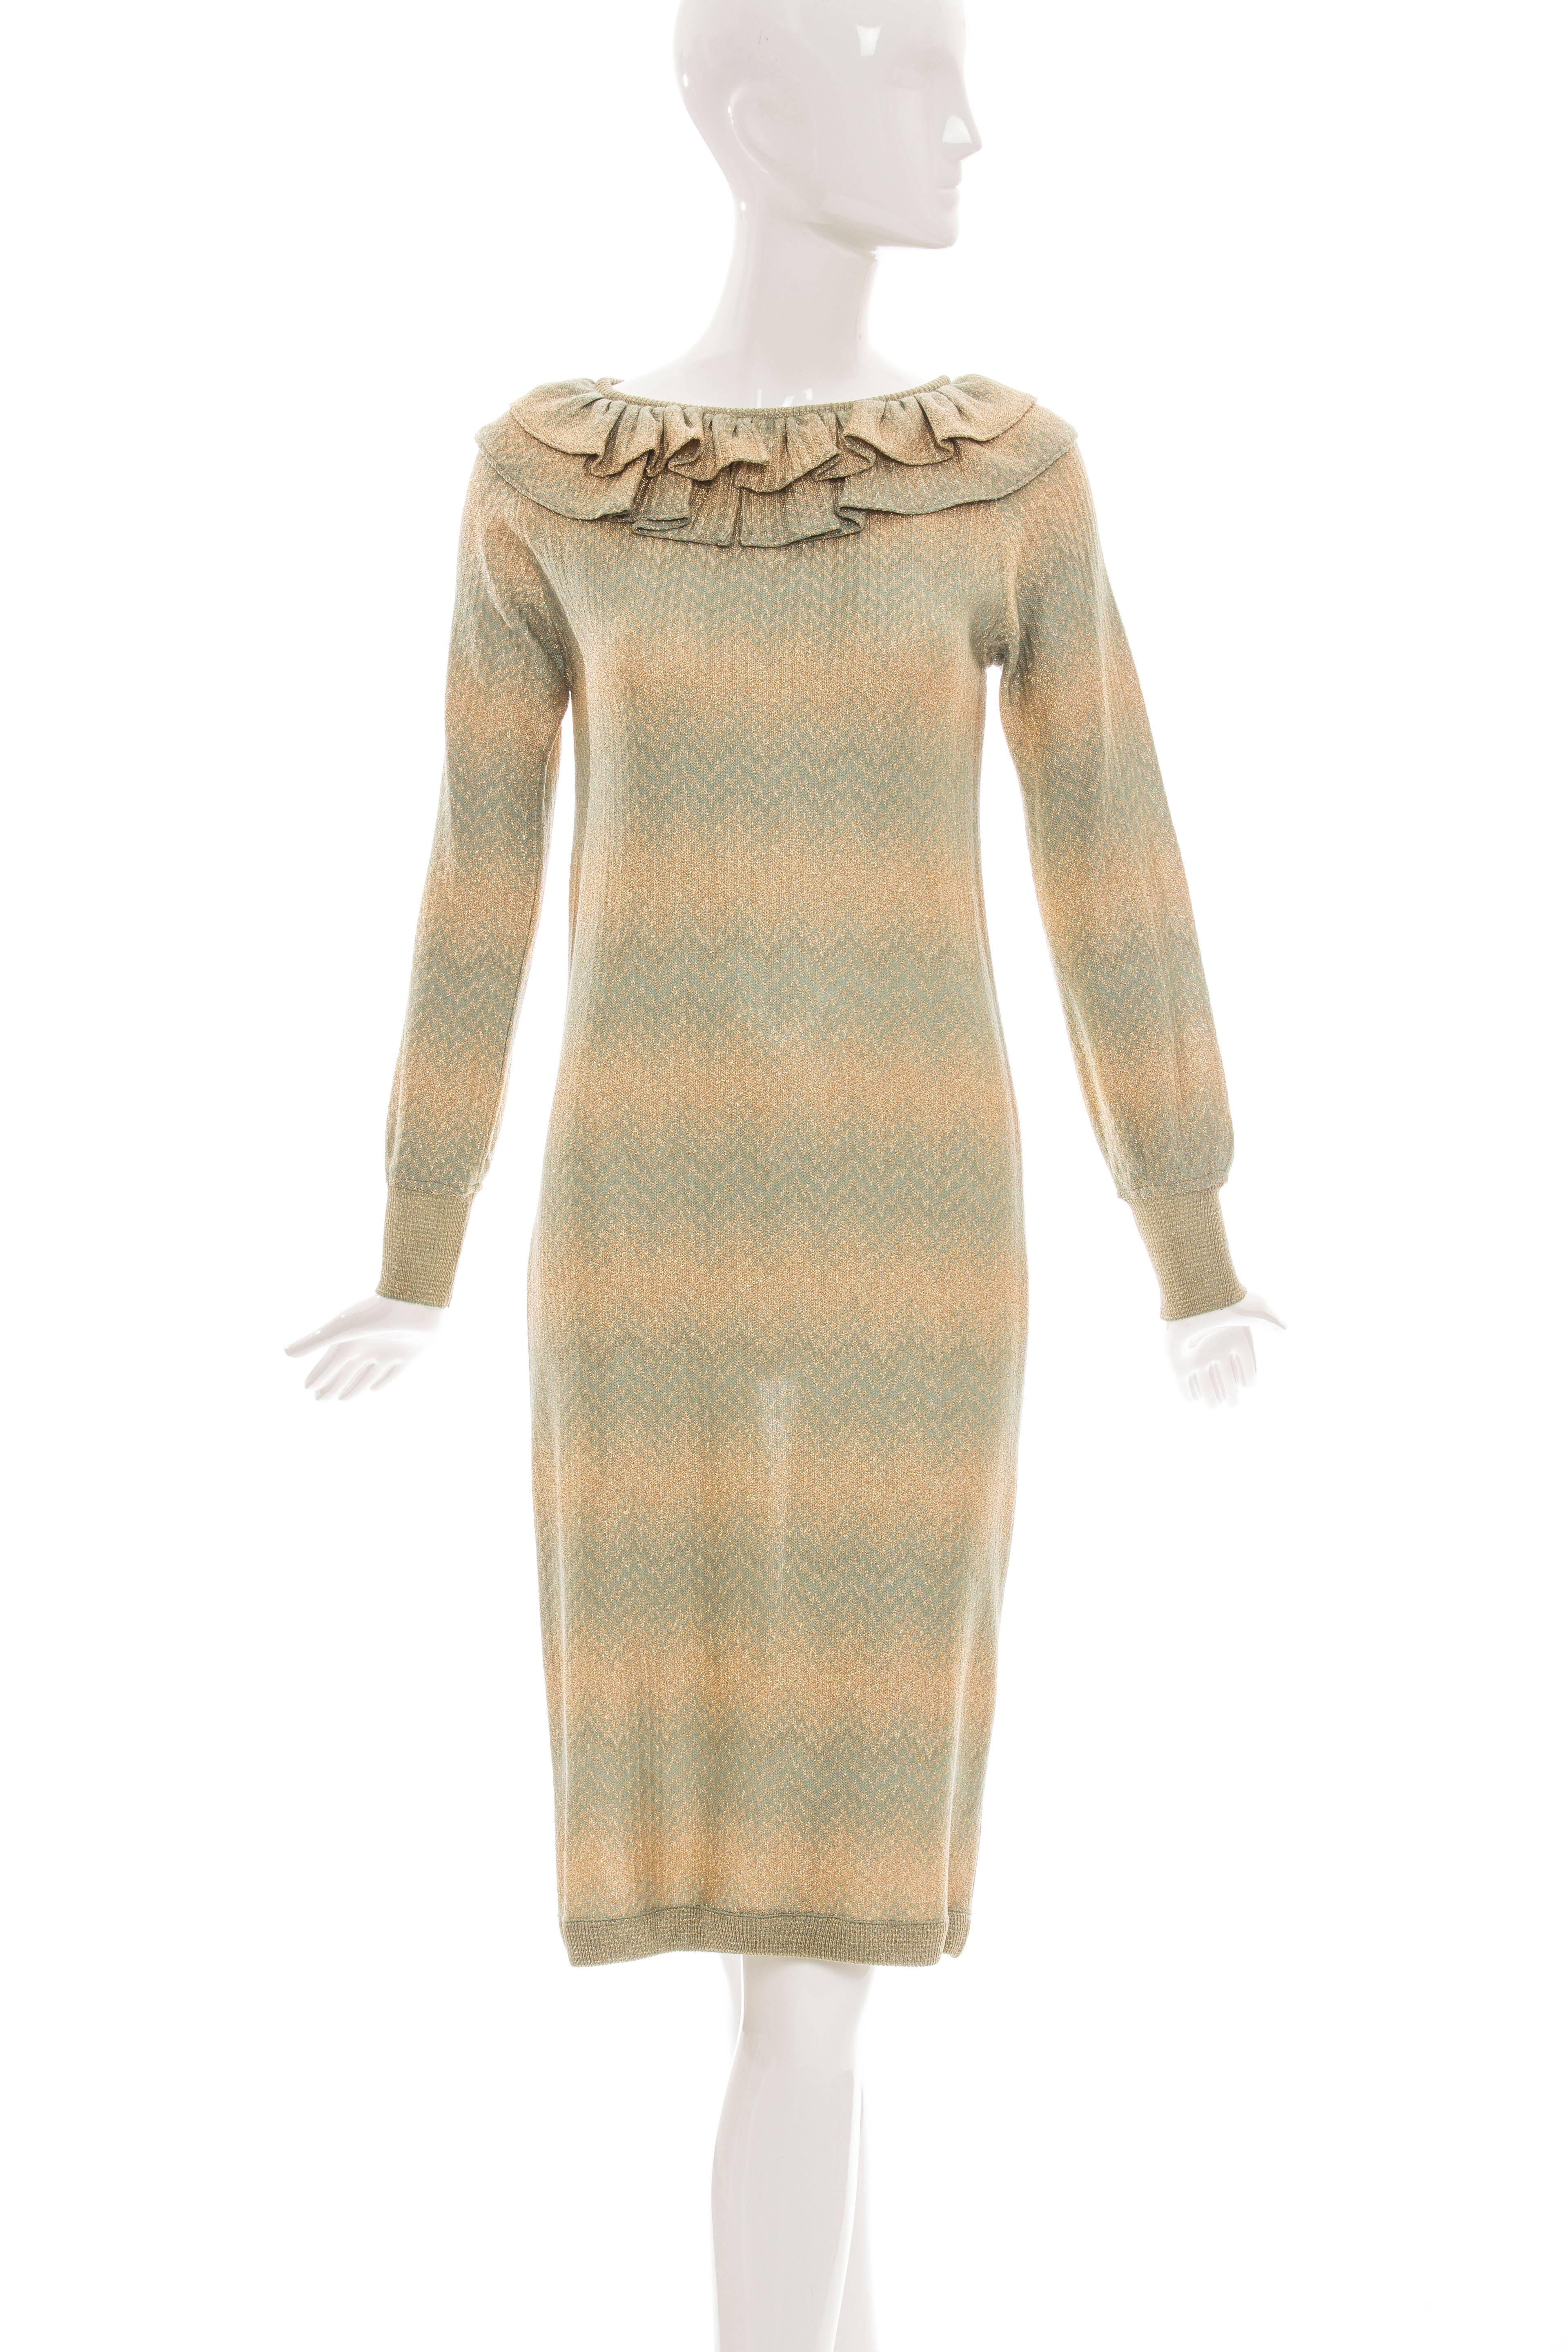 Missoni gold label, circa 1980's long sleeve dress with ruffled neckline.